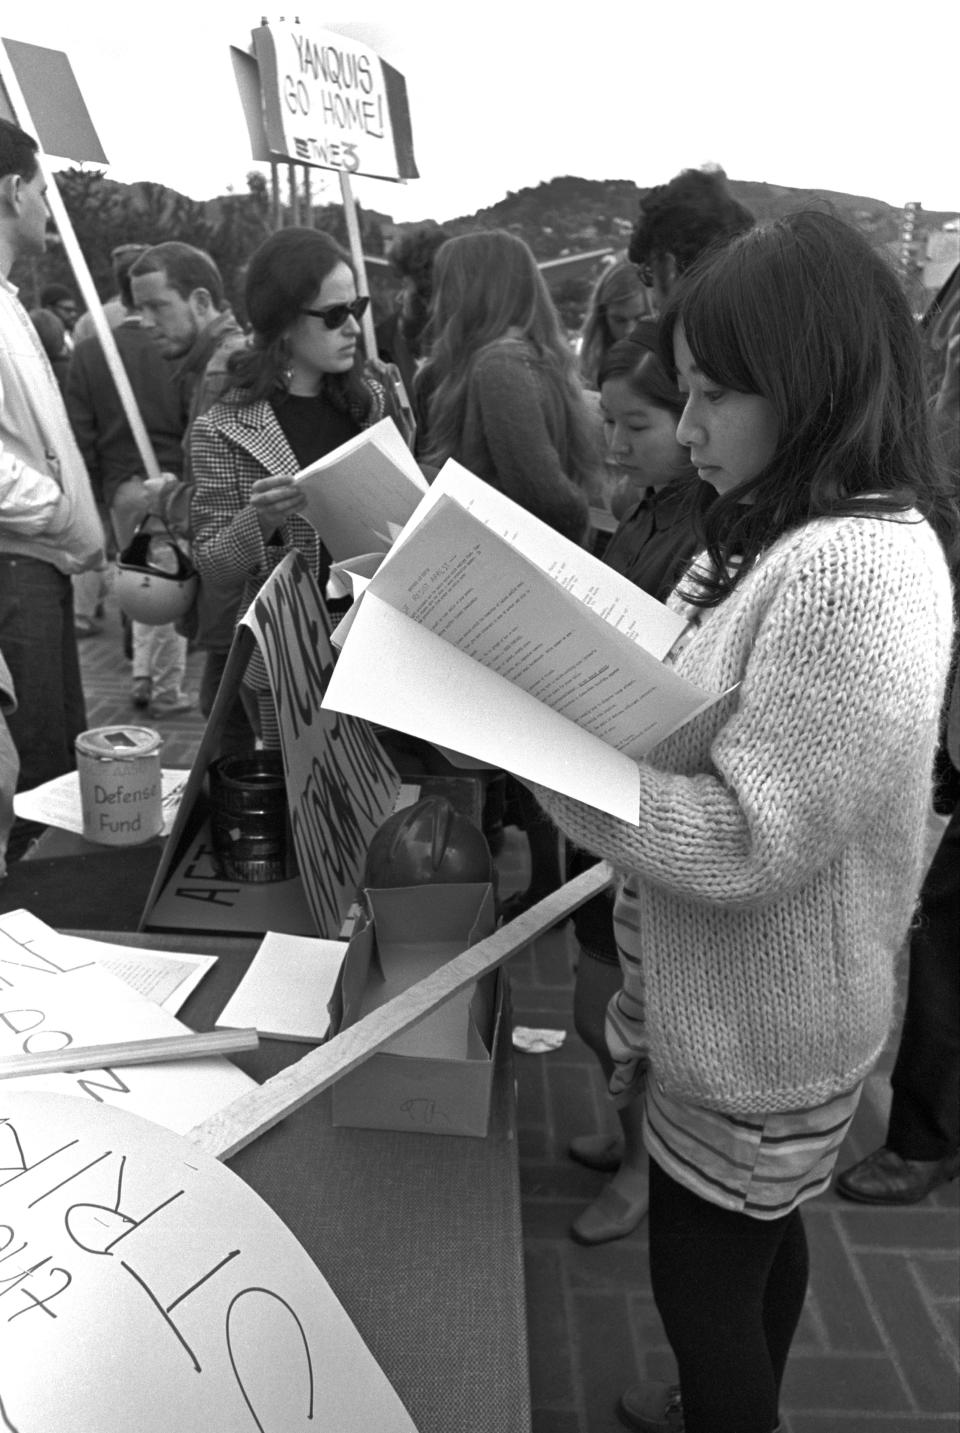 An unidentified student reads from an informational packet during a demonstration on the campus of the University of California